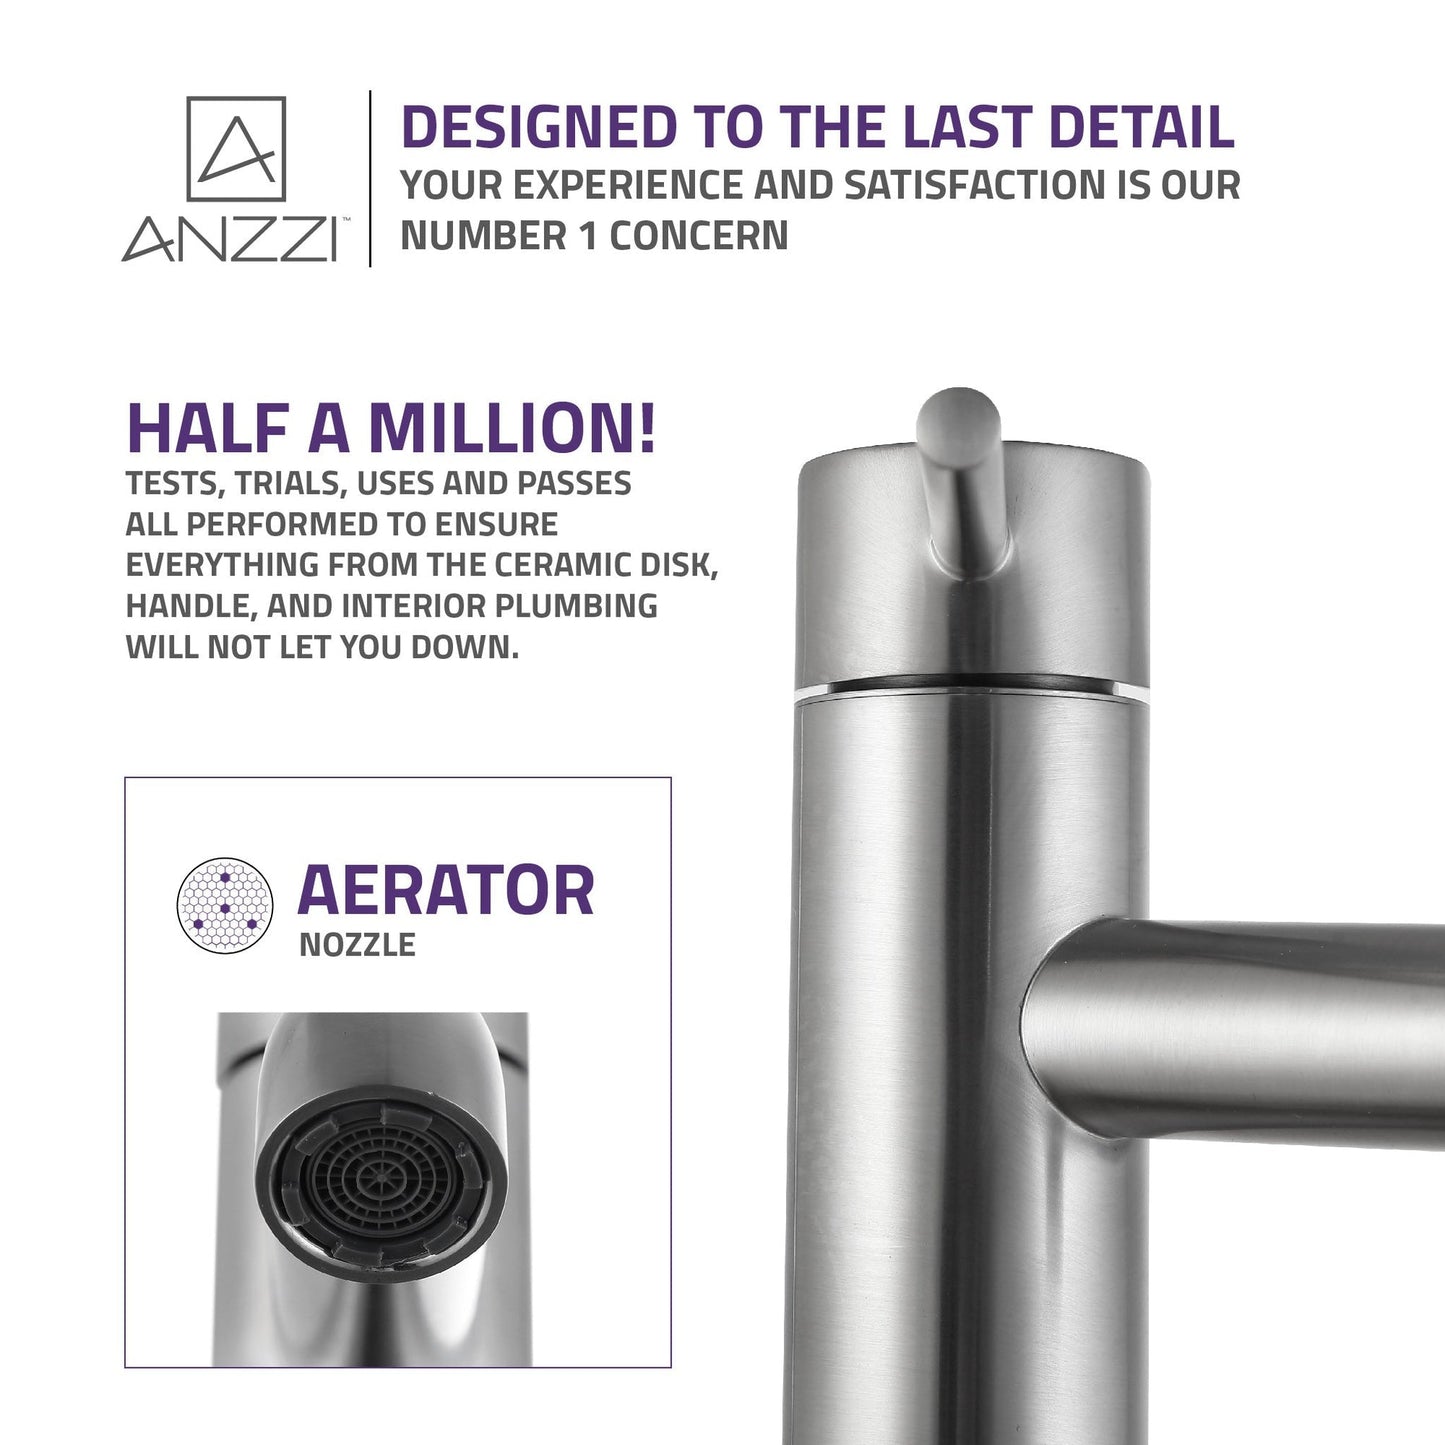 ANZZI Valle Series 4" Single Hole Brushed Nickel Bathroom Sink Faucet